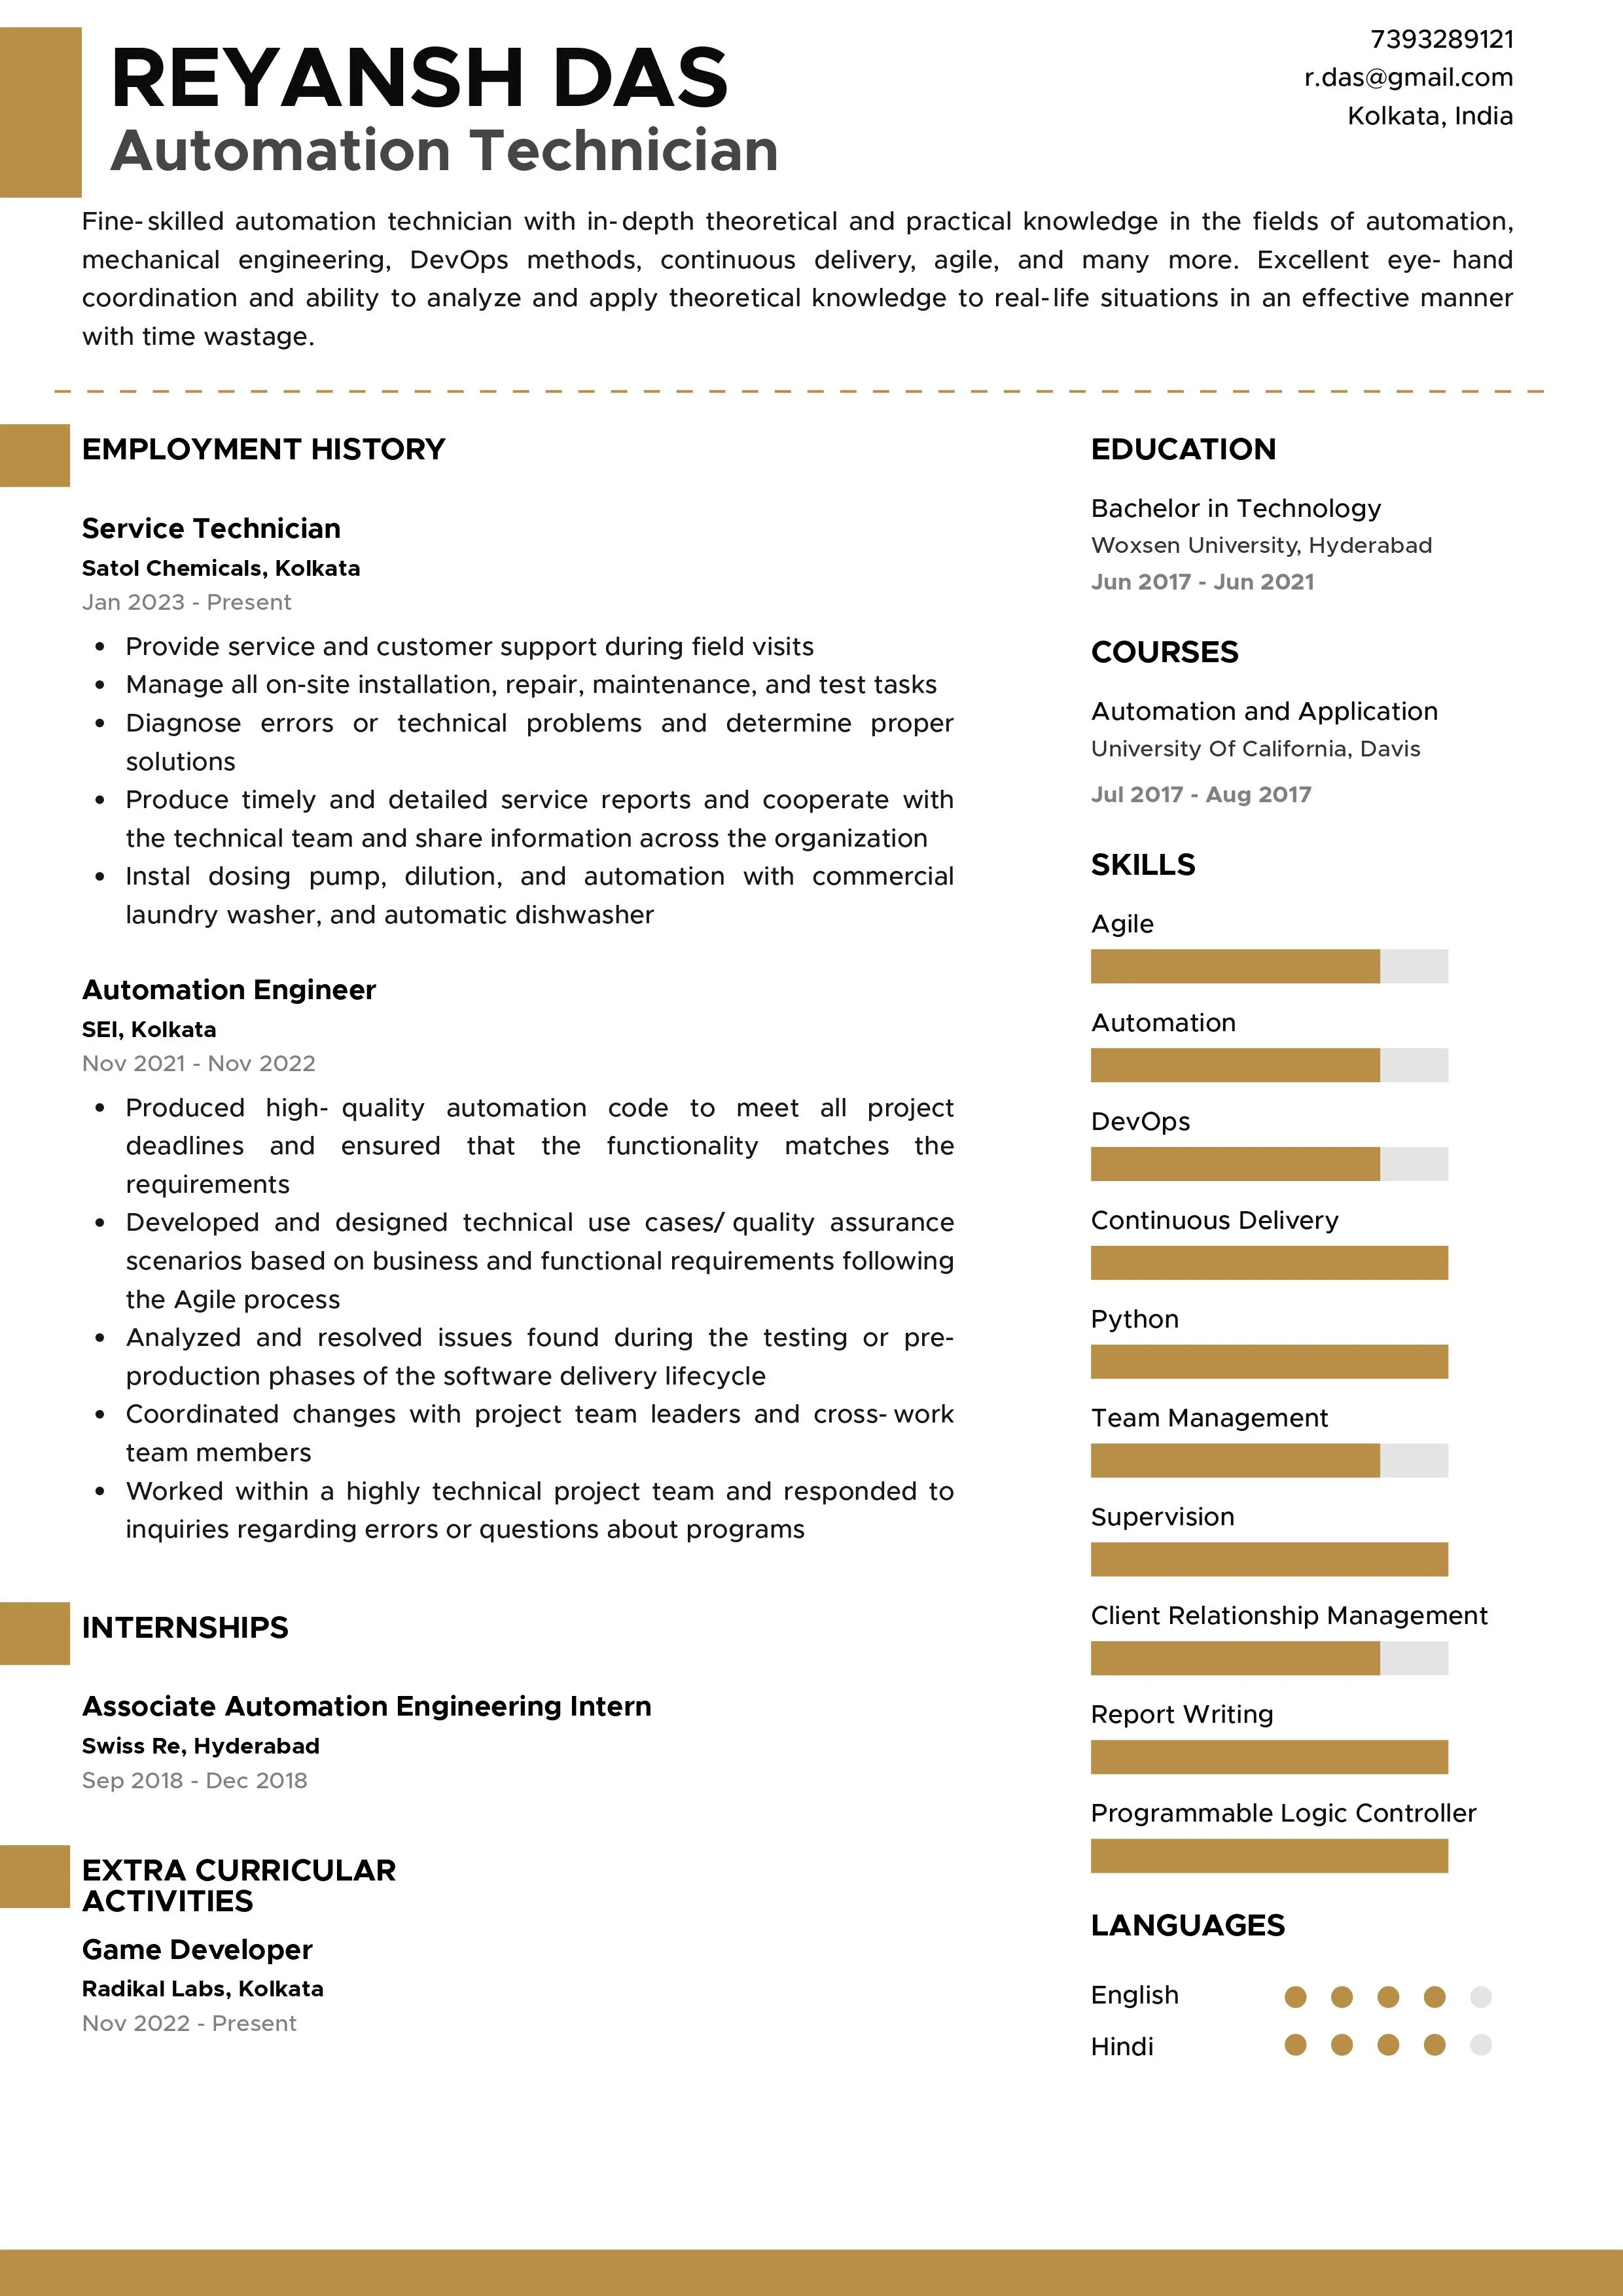 Sample Resume of Automation Technician | Free Resume Templates & Samples on Resumod.co